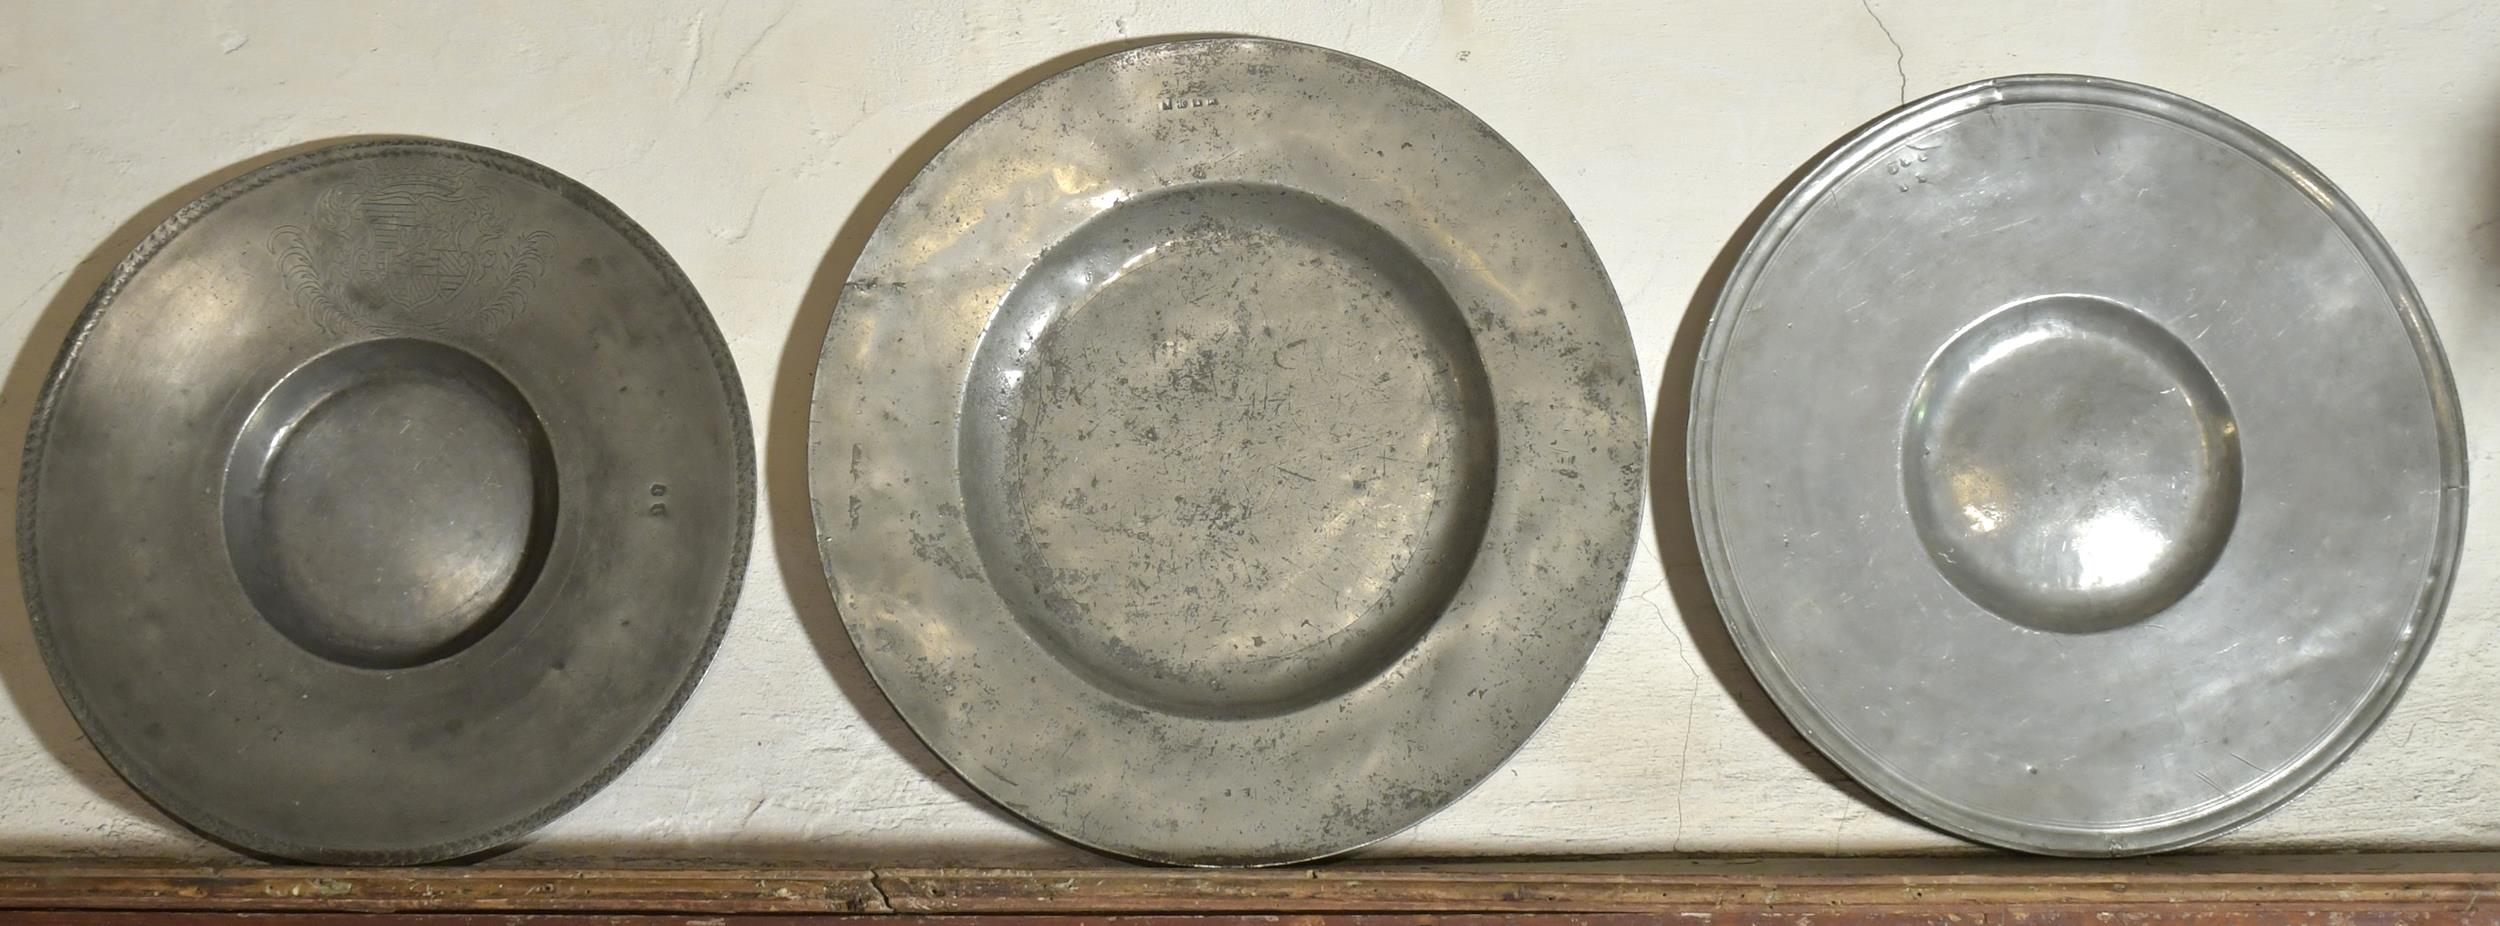 THREE EARLY WIDE RIM PEWTER CHARGERS  29e1ec